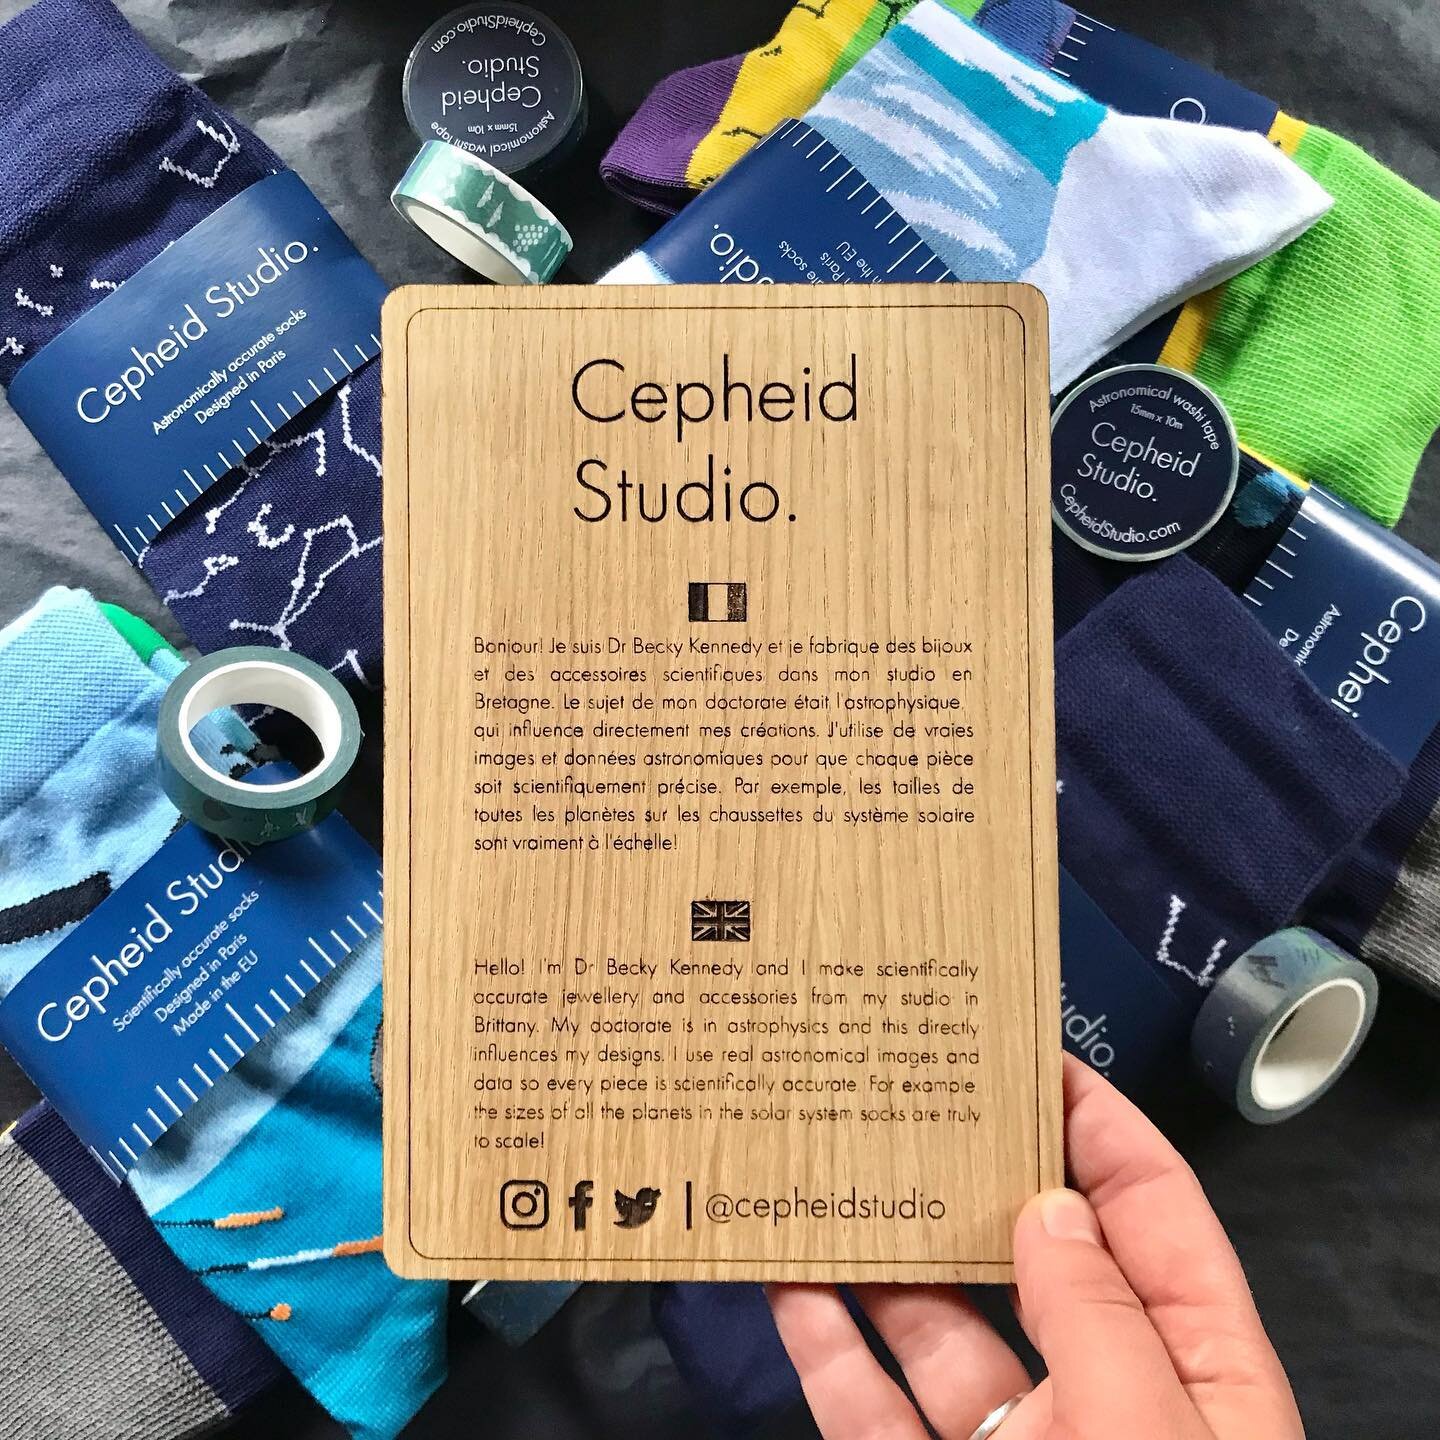 This week I&rsquo;m packing up an order for a brand new wholesale client, which means it&rsquo;s time to make a brand new &lsquo;welcome to Cepheid Studio&rsquo; sign! Whenever I&rsquo;m shopping in a boutique that stocks independent designers I love